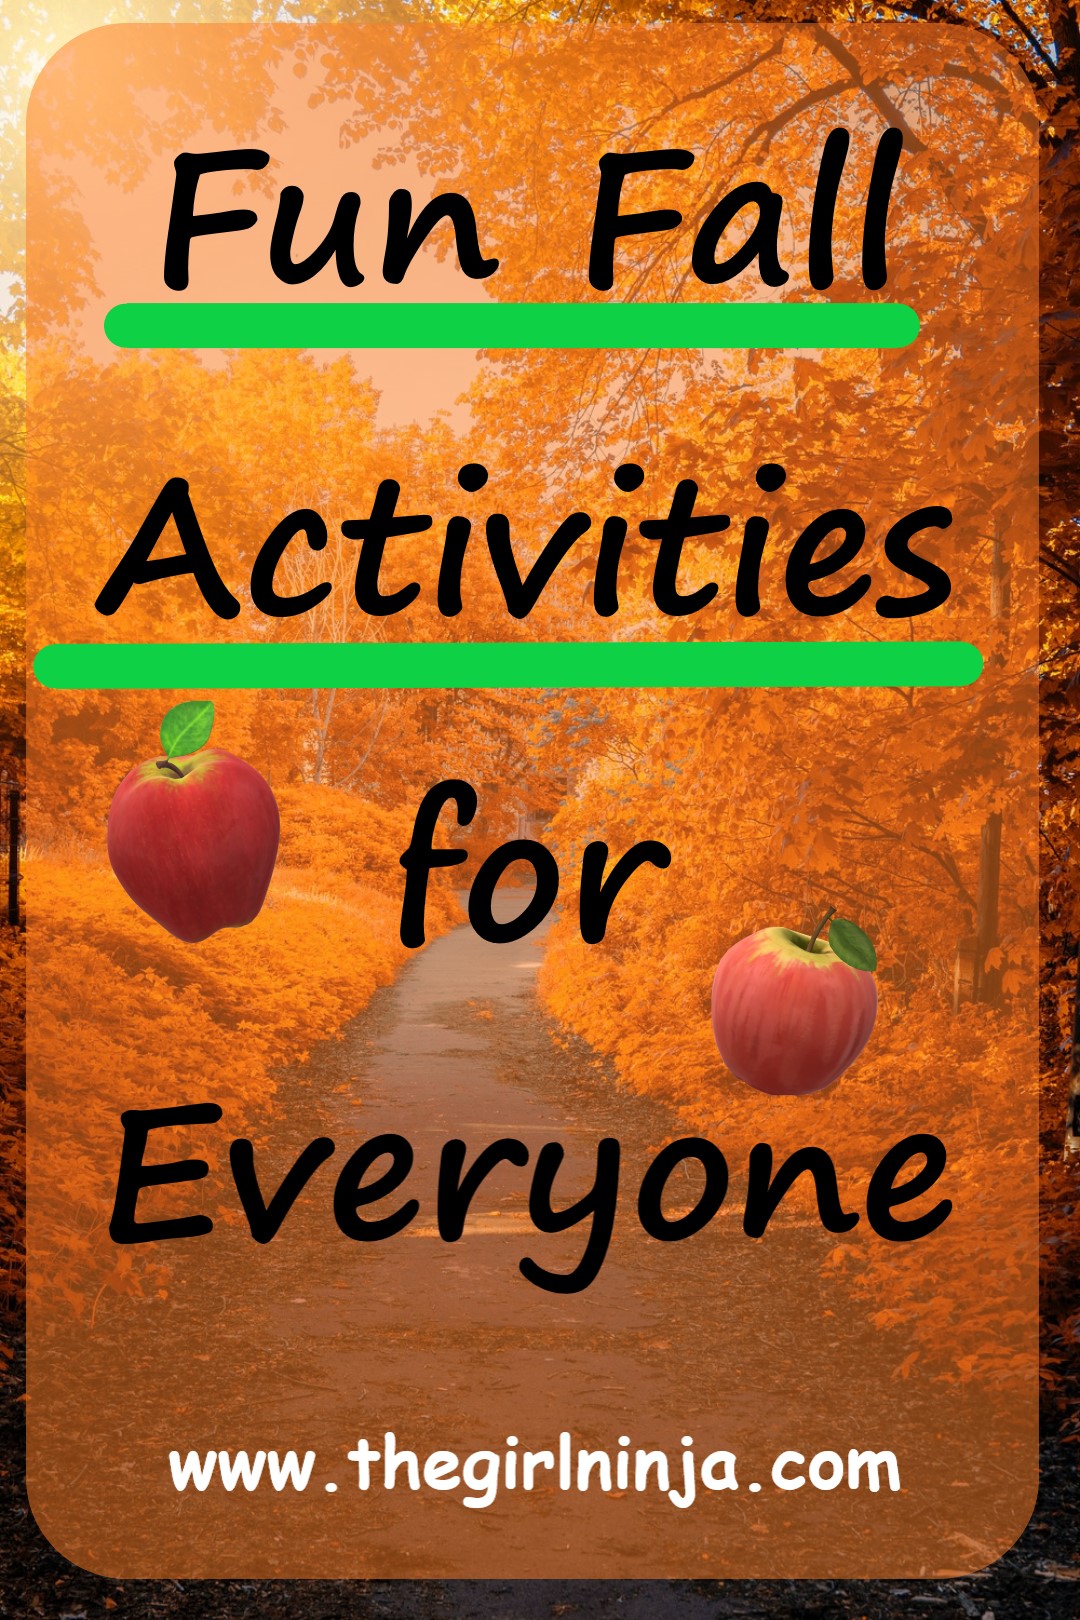 Paved path between trees with gold, orange, and brown leaves. Black text over trees and path read Fun Fall Activities for Everyone. A green line underlines Fun Fall Activities. Apples are scattered around the words.  At bottom center white text reads www.thegirlninja.com